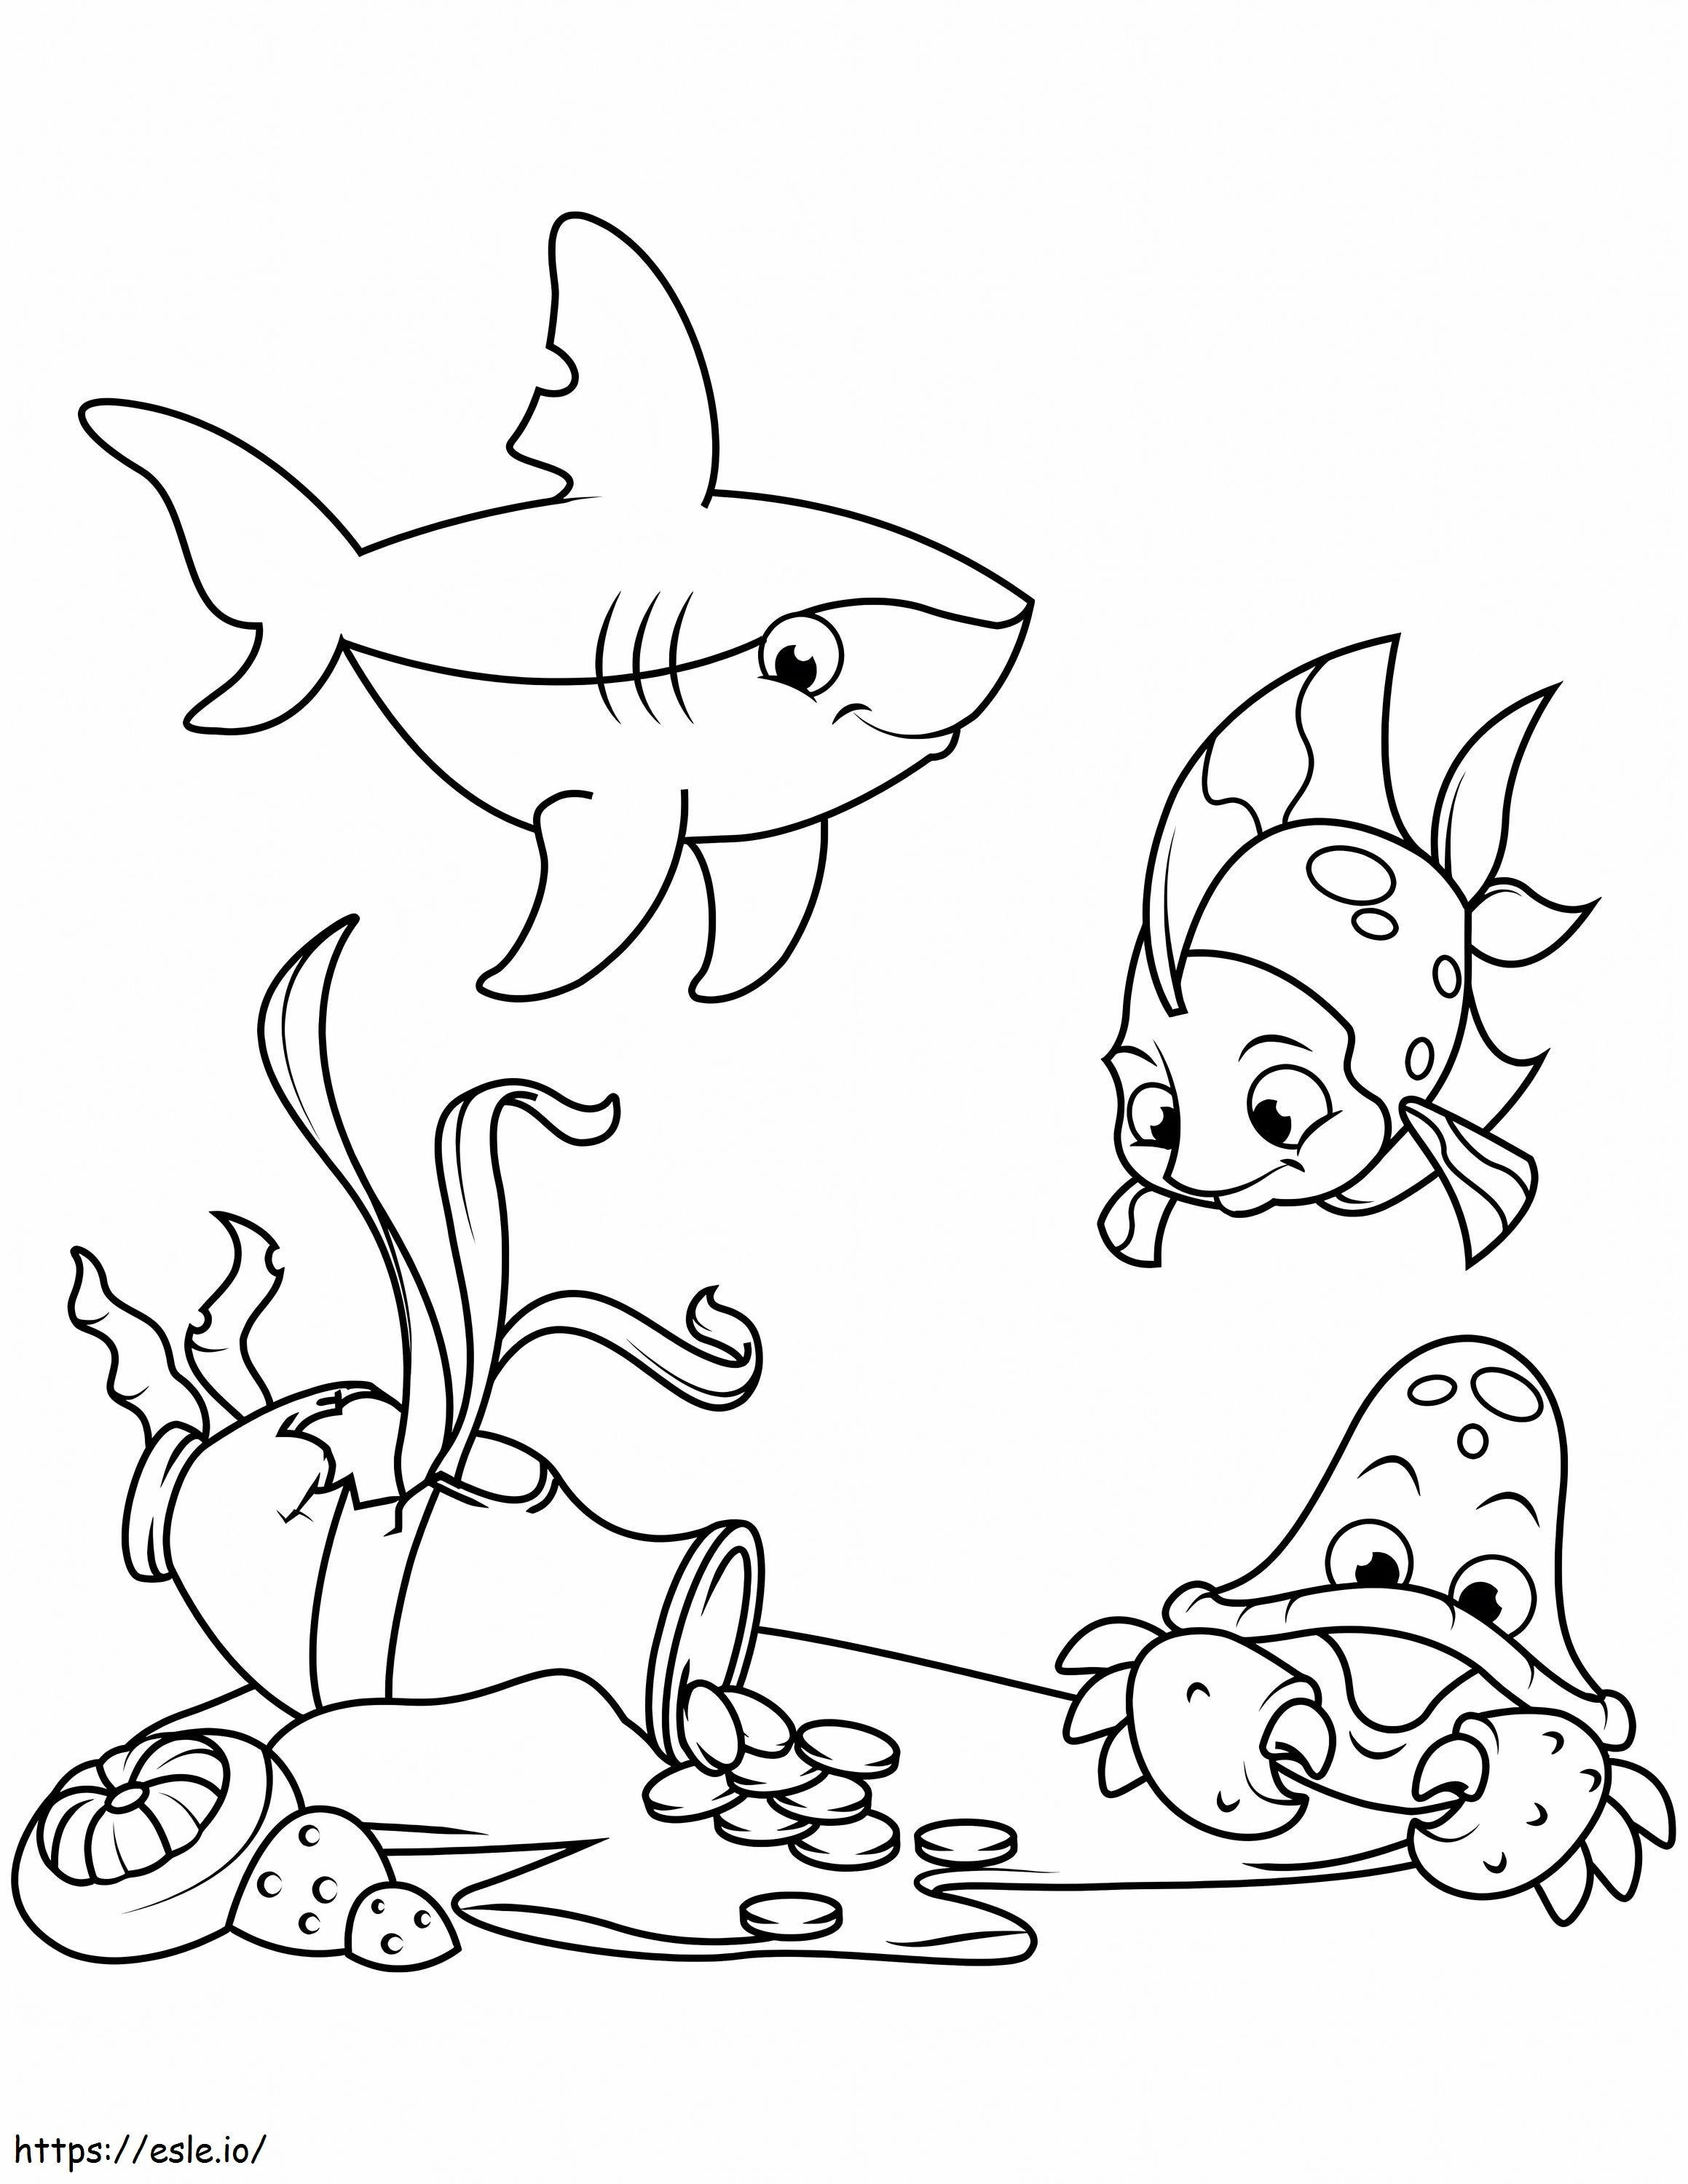 Ocean Scene To Print coloring page